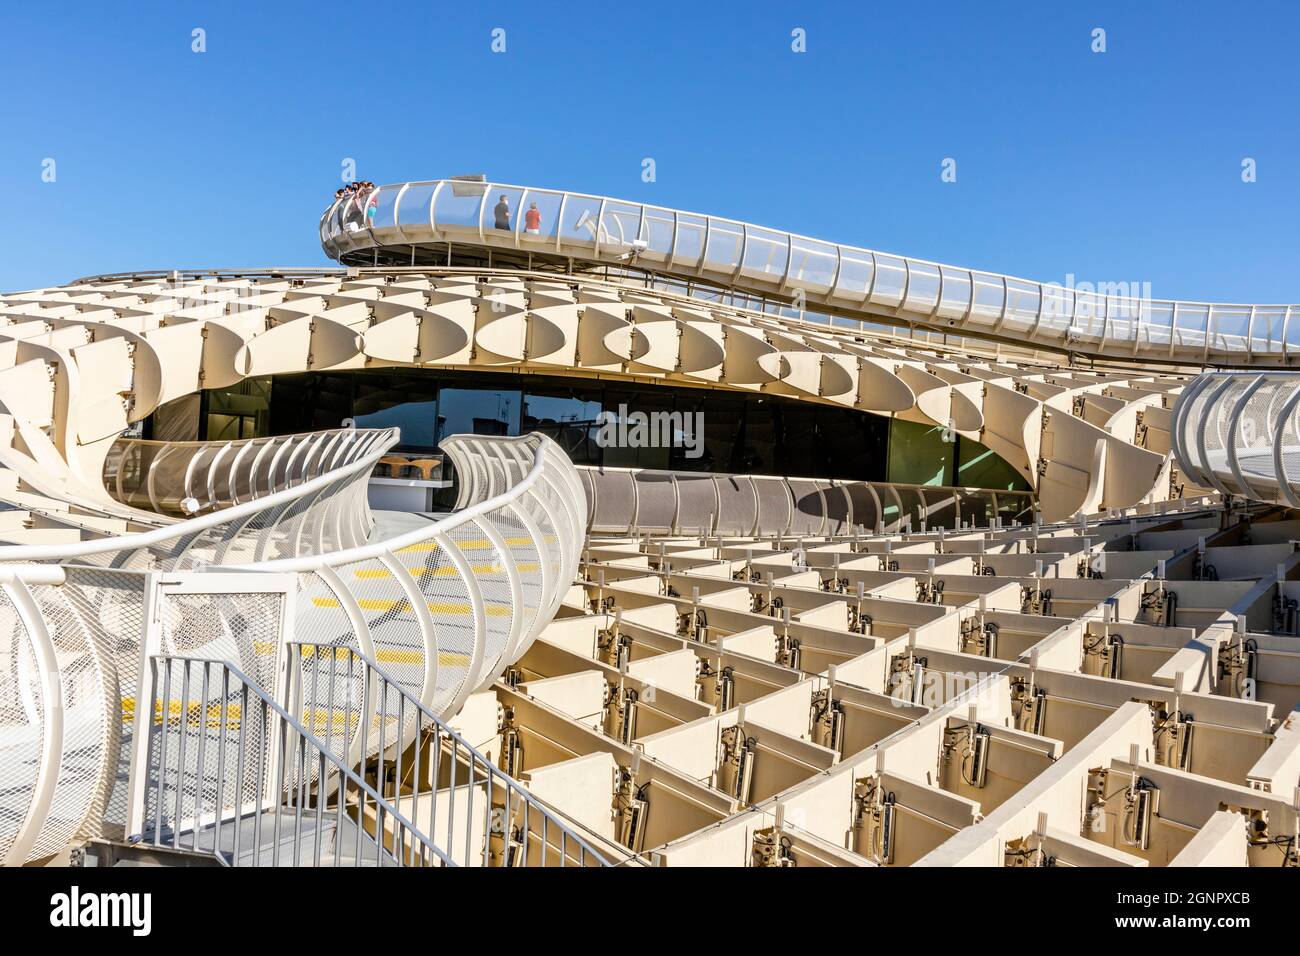 Architectural detail of Setas de Sevilla - wooden roof with walkways on the top with amazing panoramic view of the city, Seville, Andalusia, Spain Stock Photo